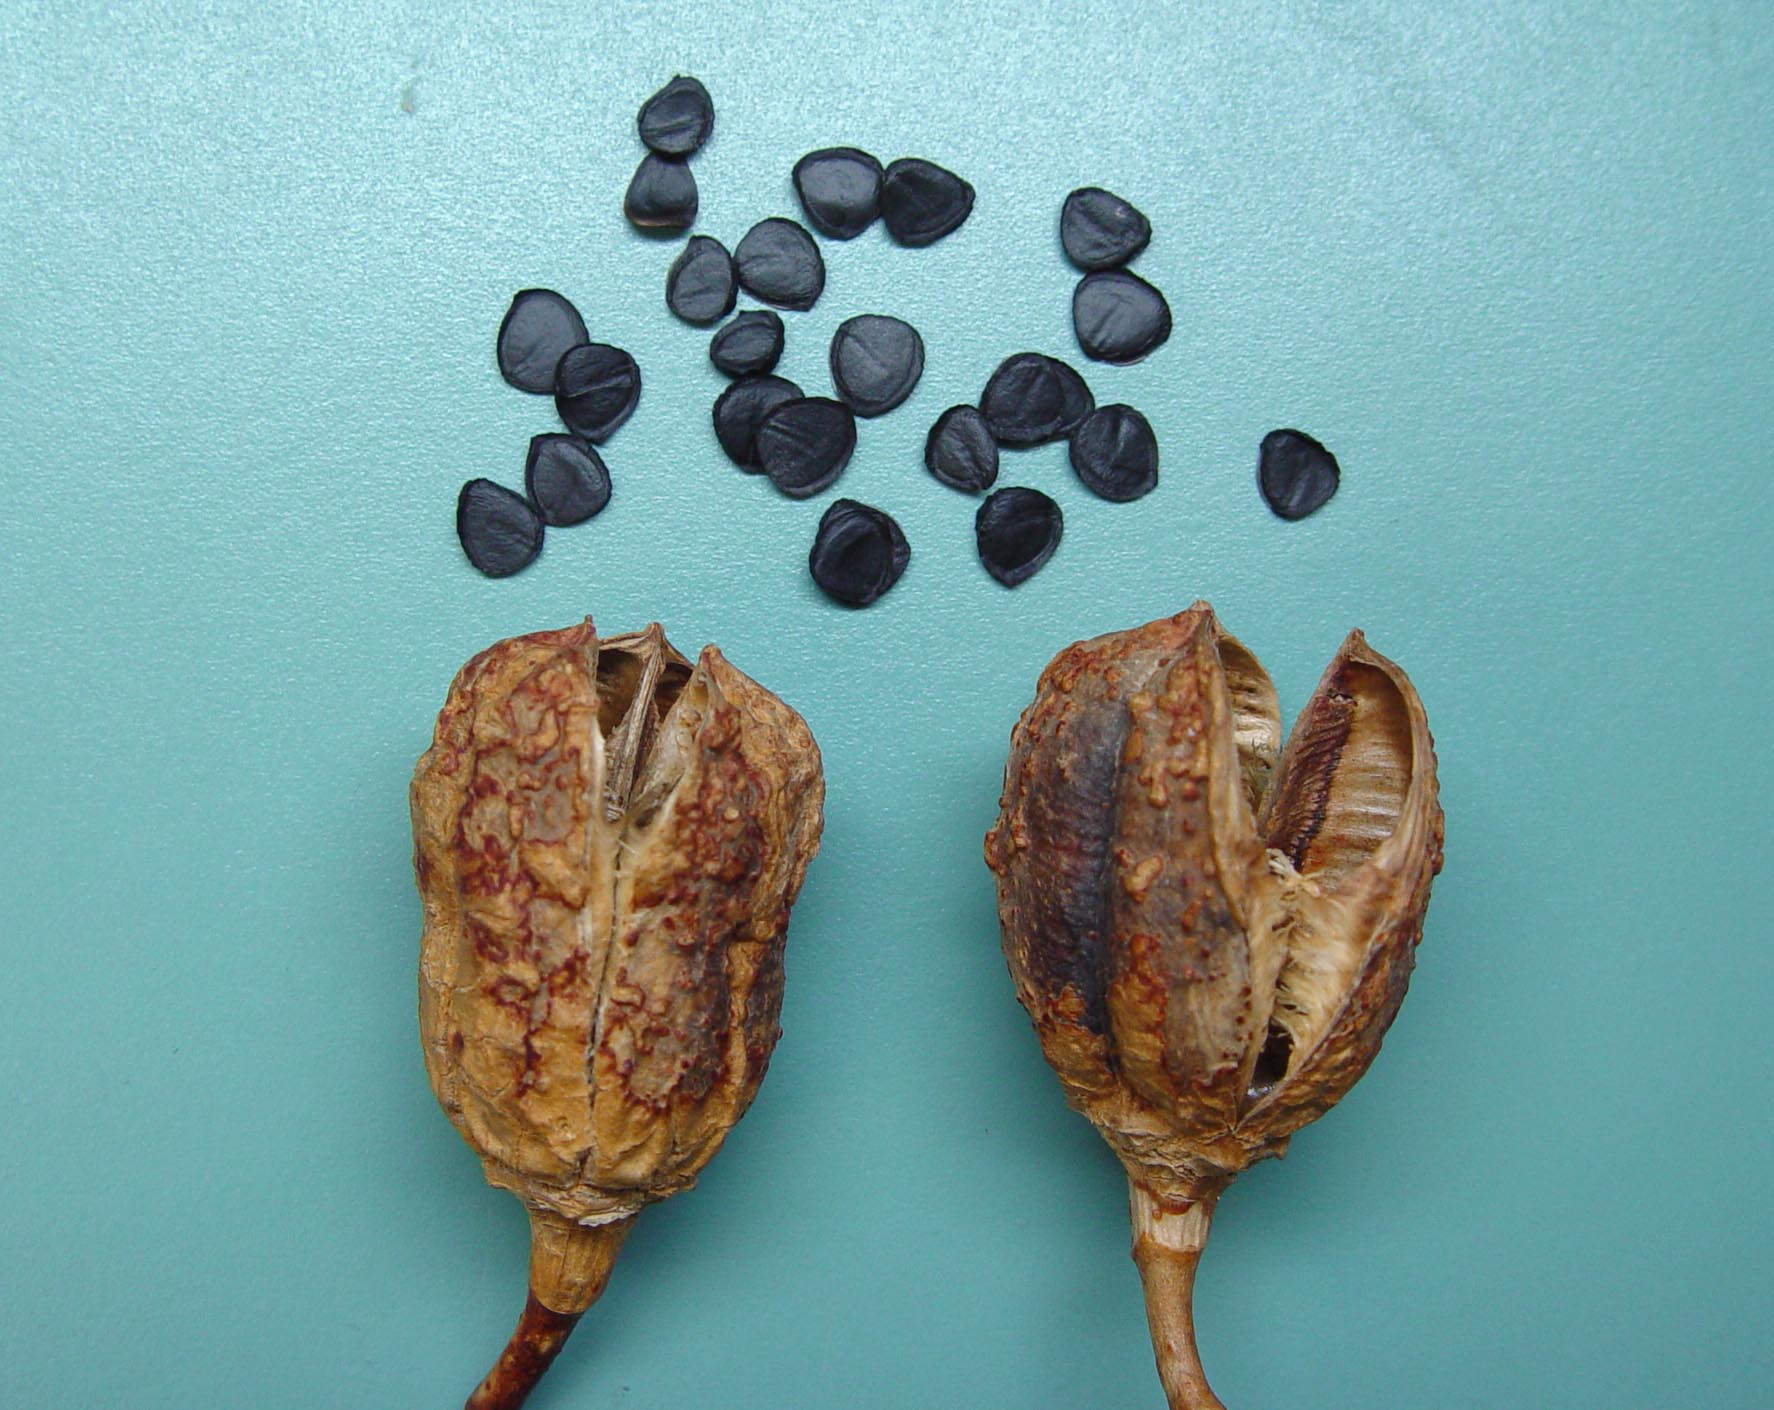 Hesperoyucca whipplei fruits with seeds removed